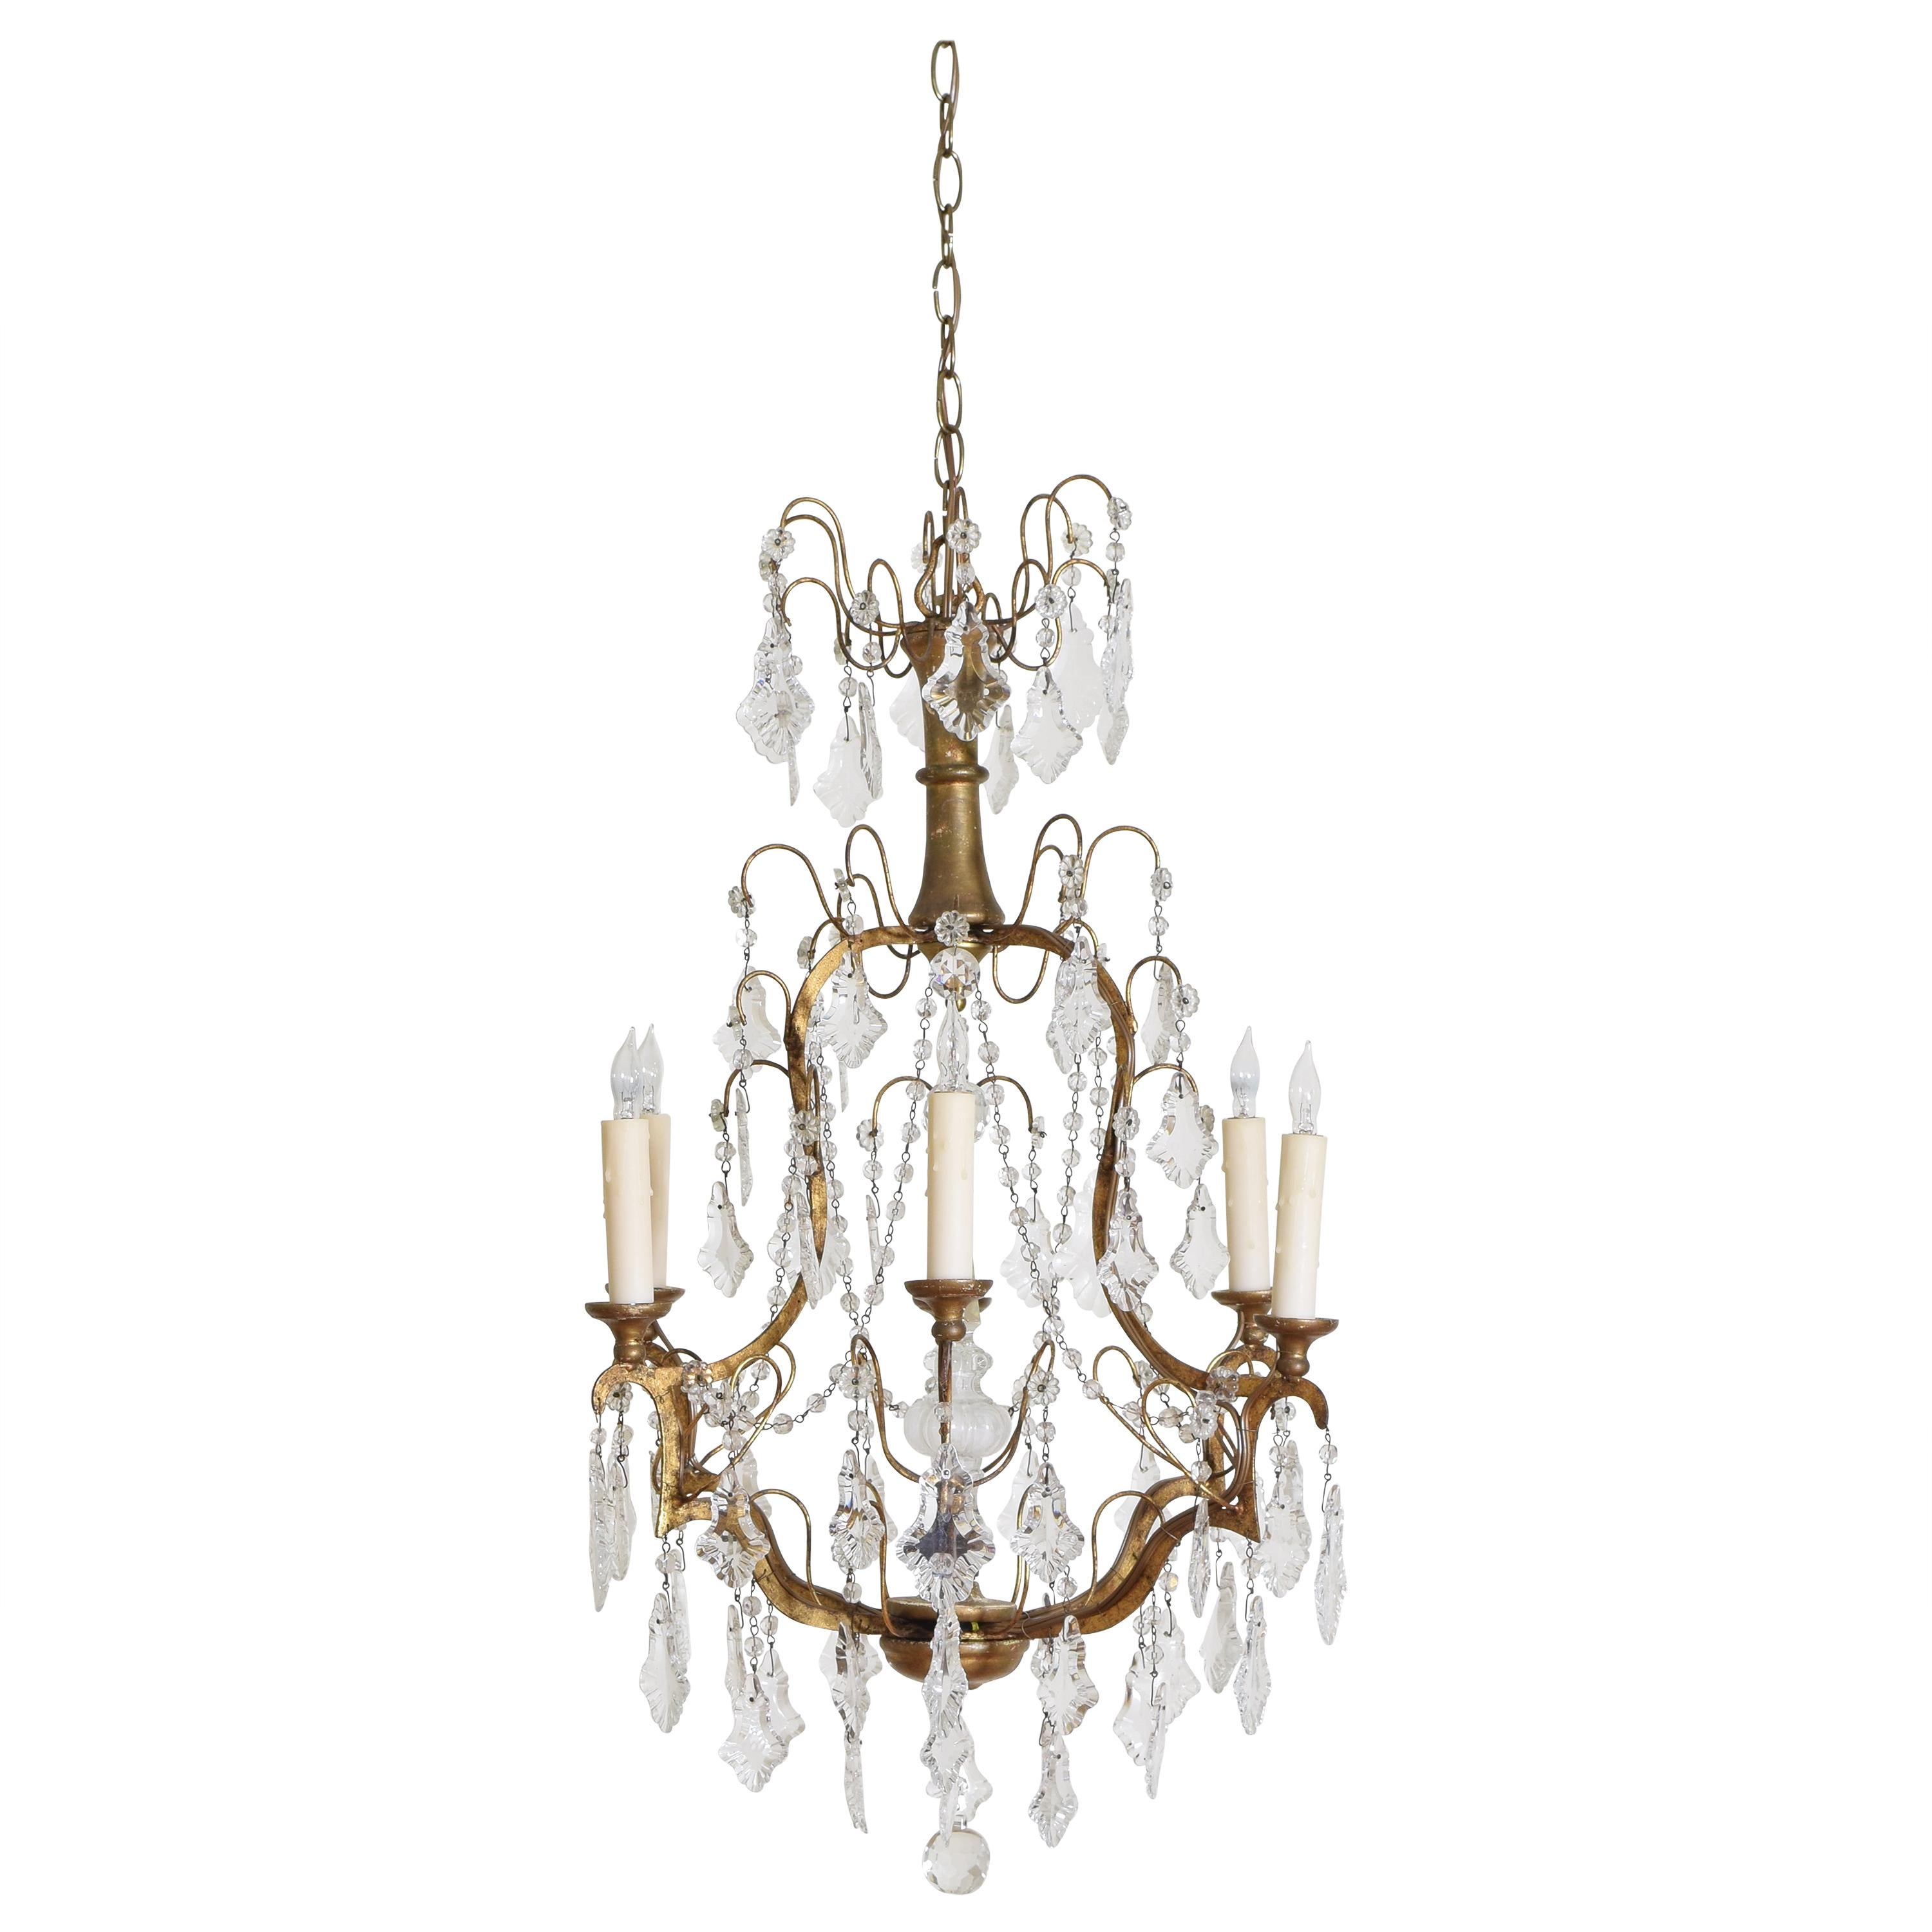 Italian Rococo Style Giltwood and Gilt Iron 6-Light Chandelier, UL Wired